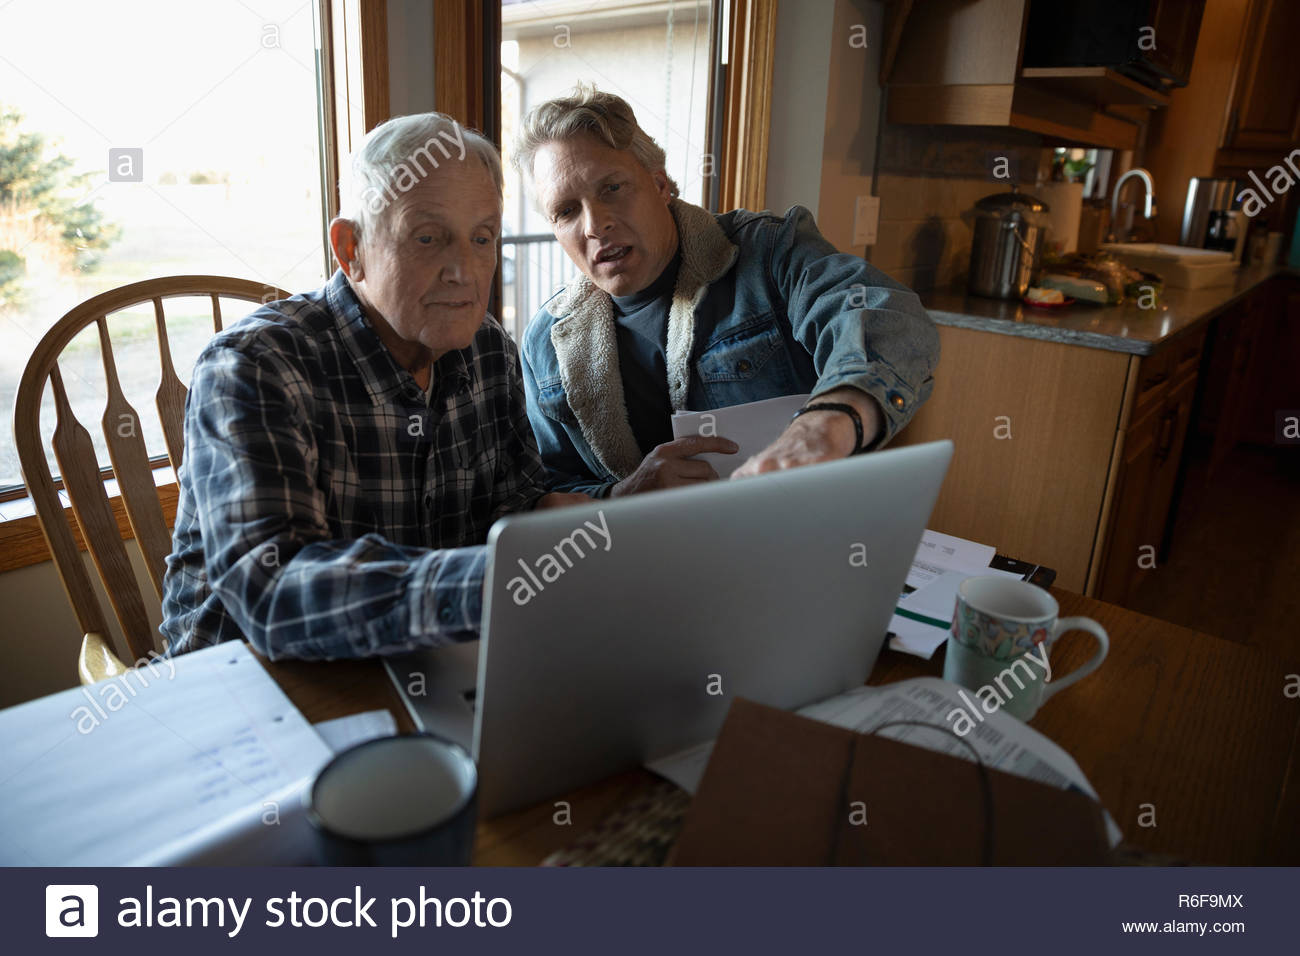 Male farmers paying bills at laptop in kitchen Stock Photo